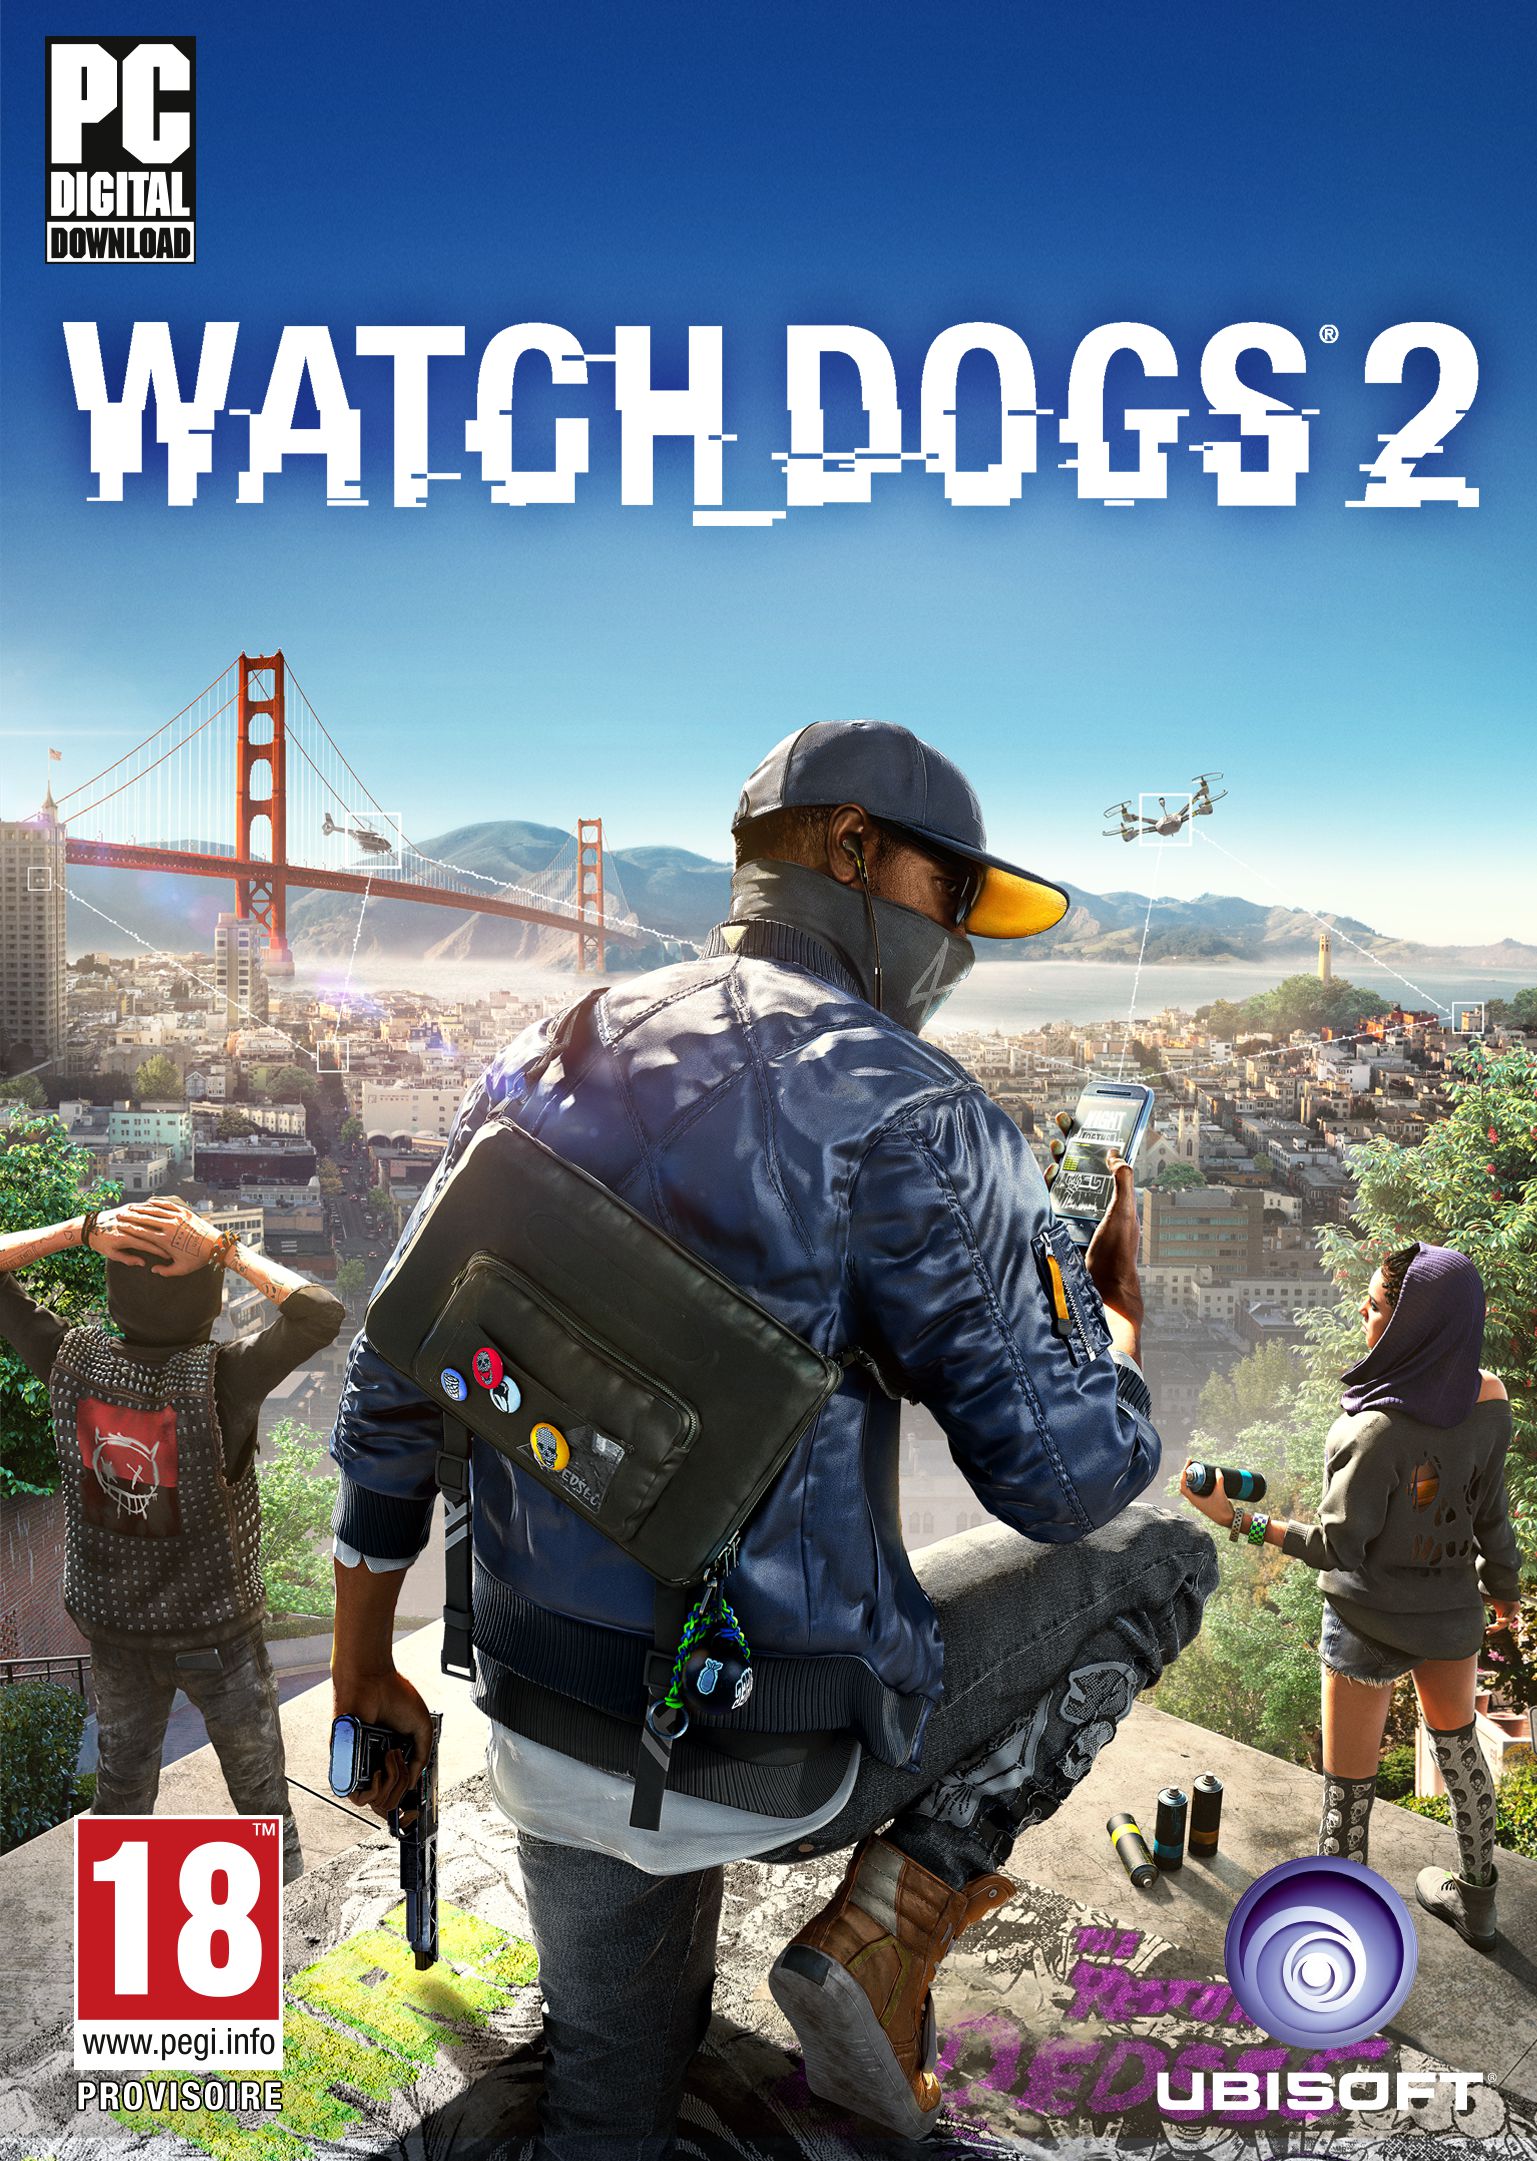 watch dogs 3 free